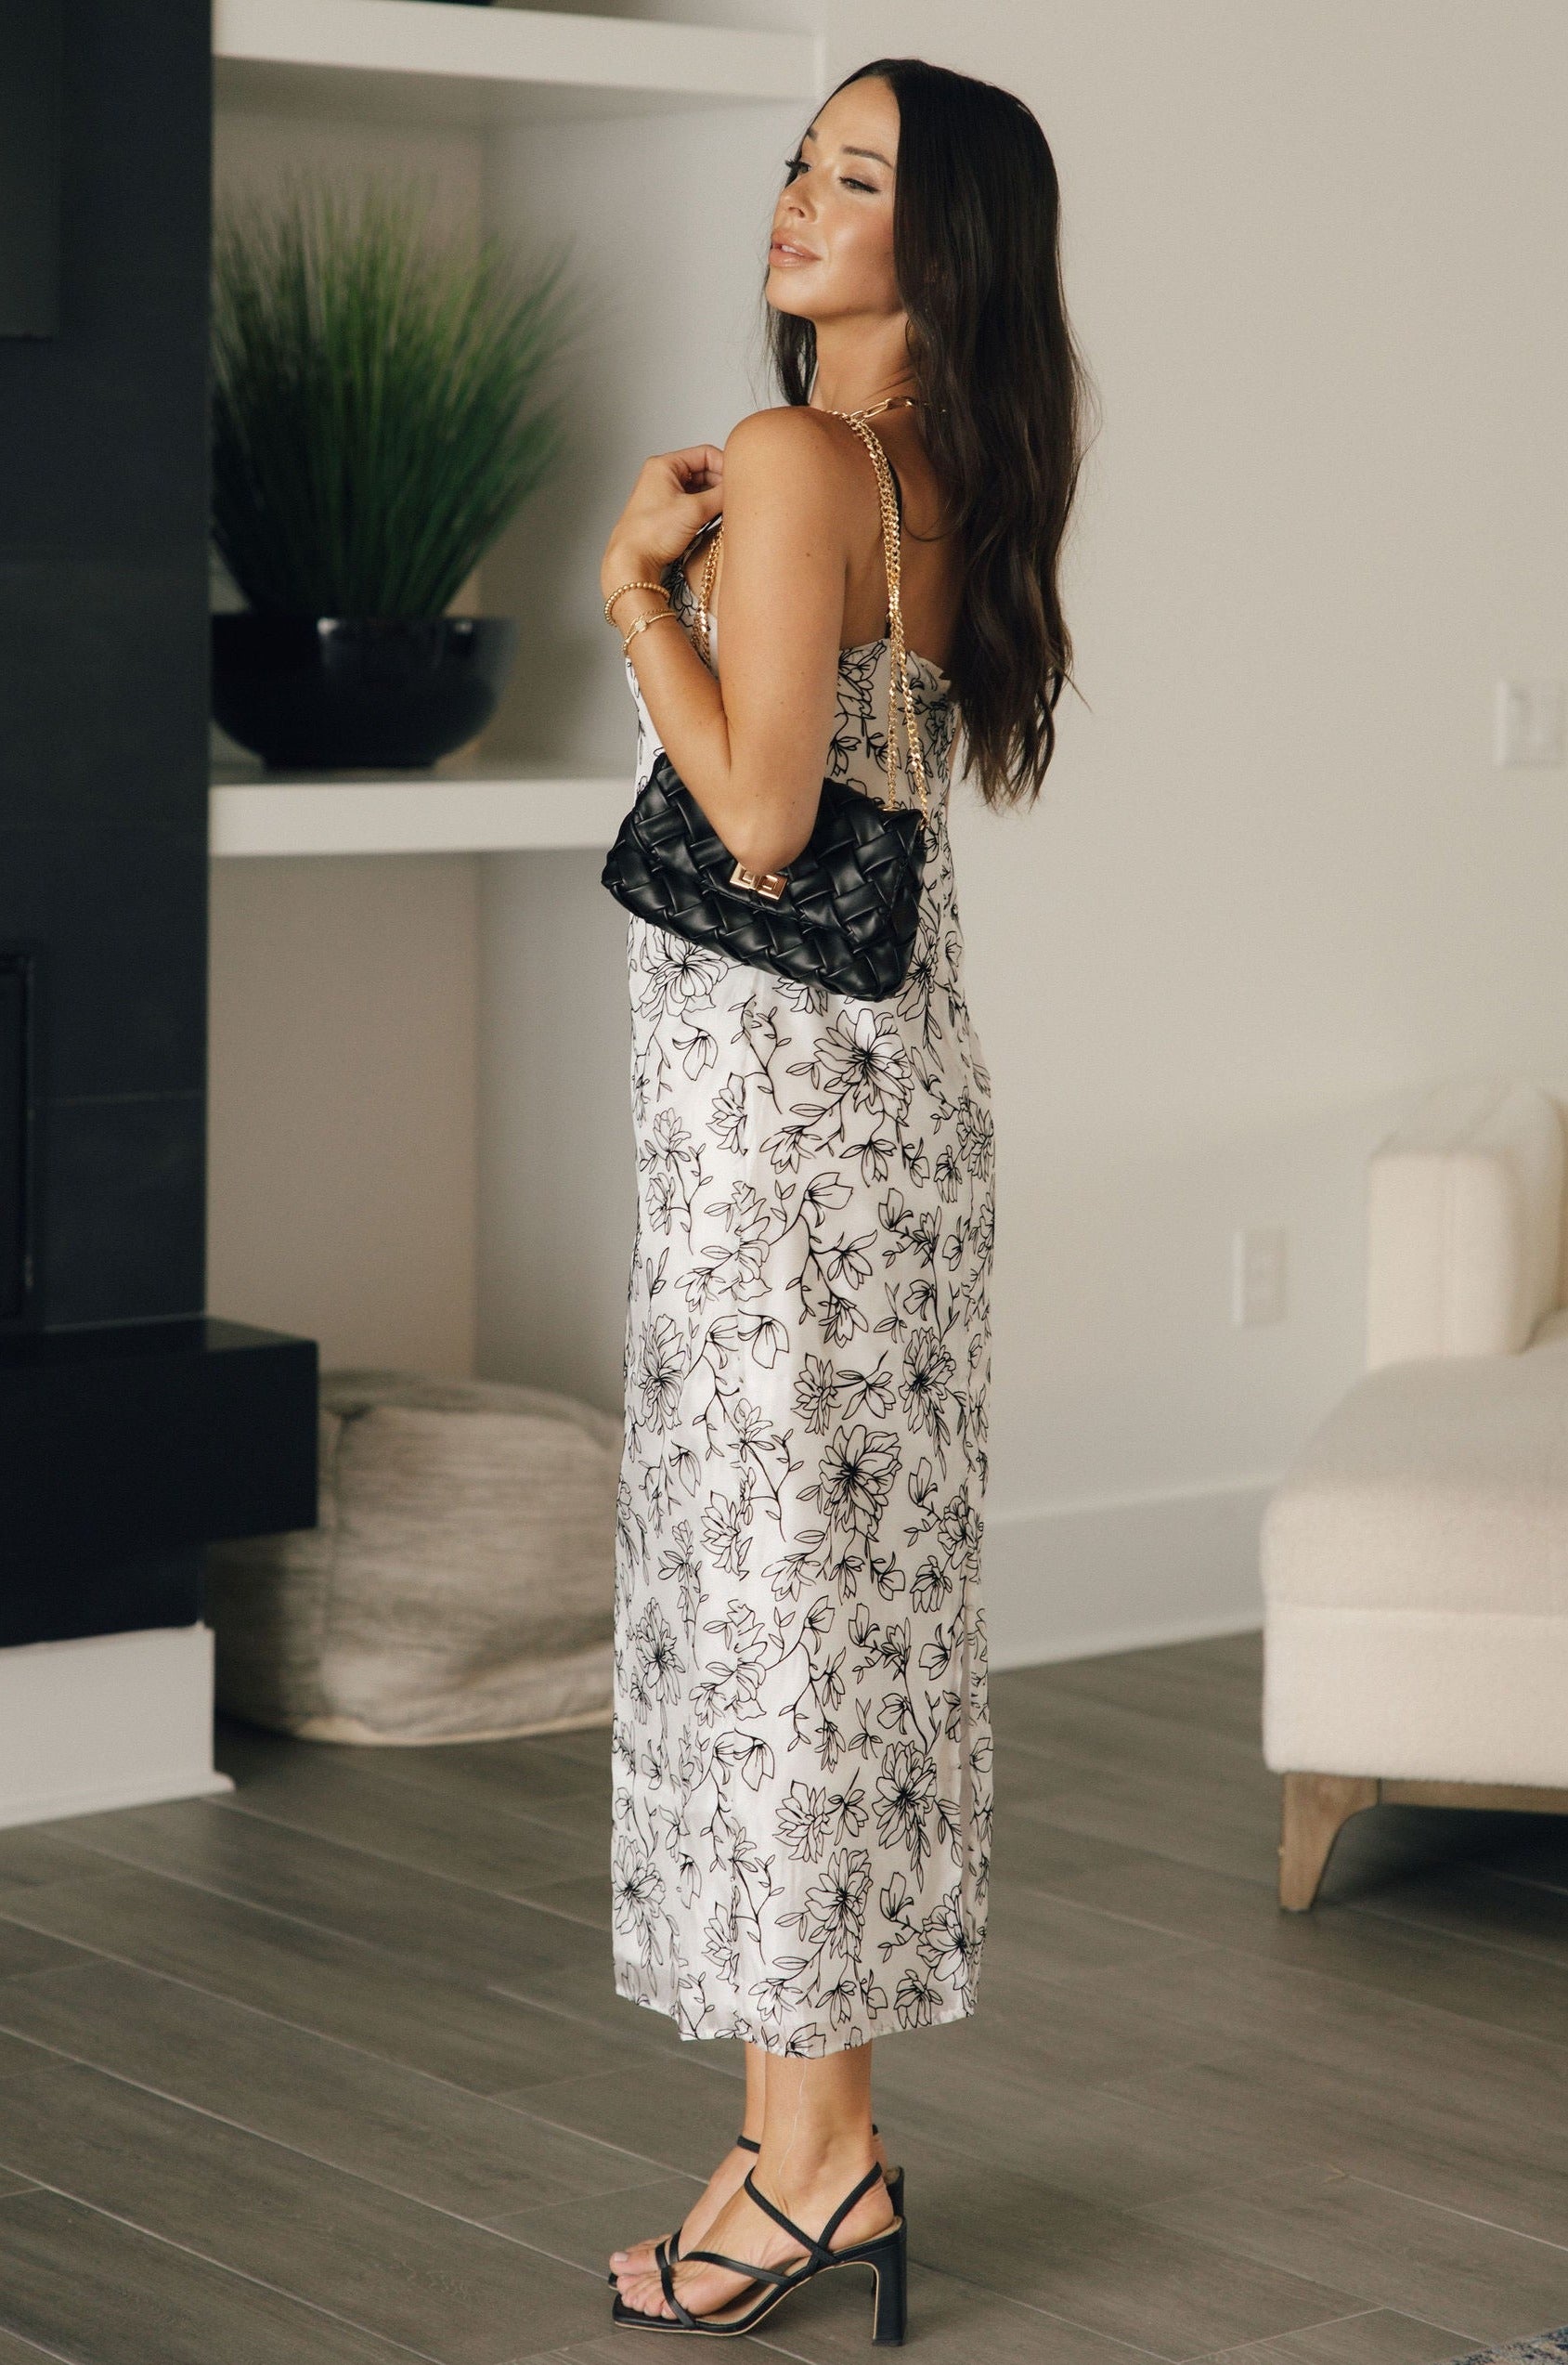 Full body side view of female model wearing the Lauren White & Black Floral Midi Dress which features White Sheer Fabric, Black Floral Print, White Lining, Midi Length, Slit Side Detail, Square Neckline, Black Adjustable Straps and Back Zipper with Hook Closure